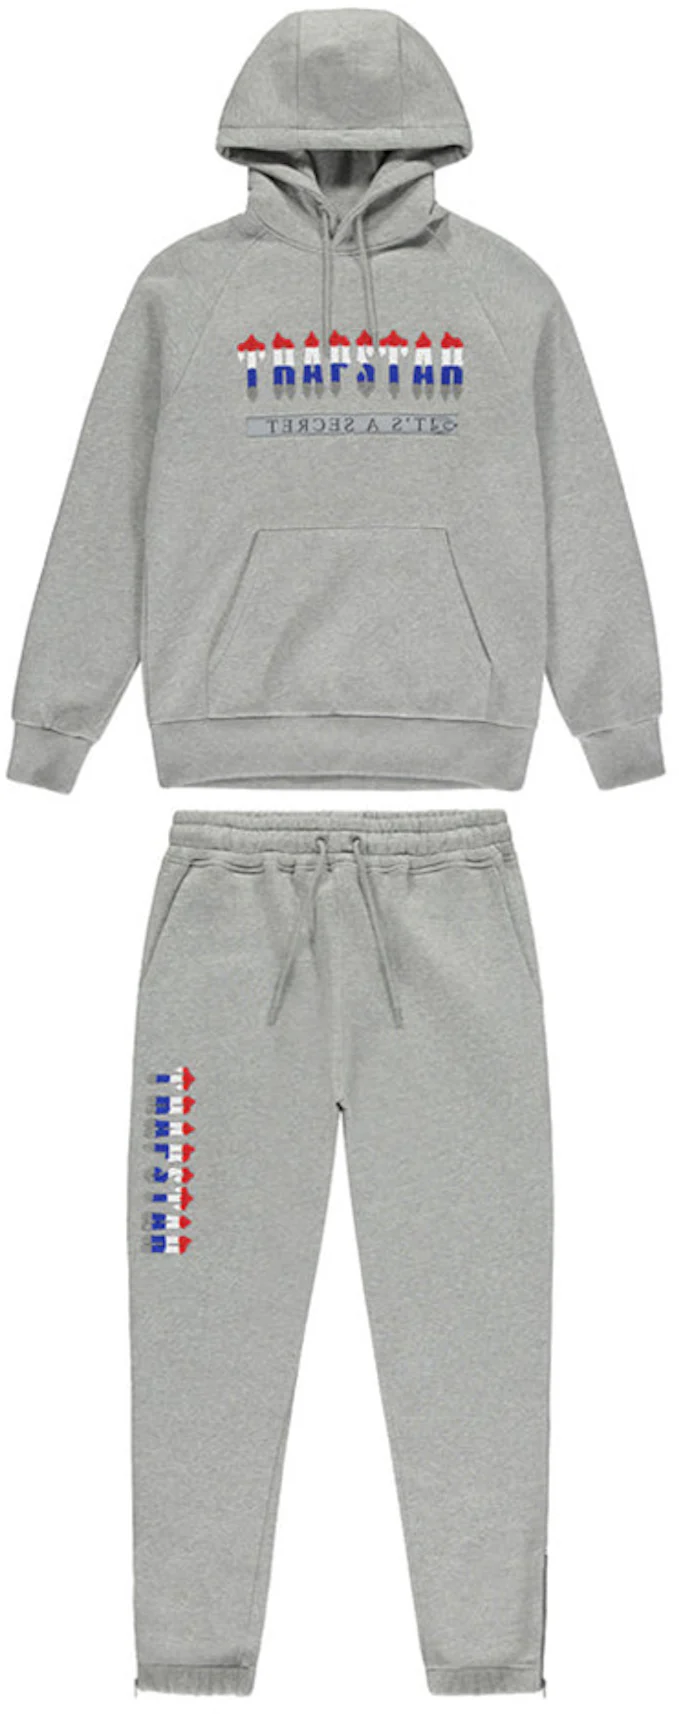 https://images.stockx.com/images/Trapstar-Chenille-Decoded-20-Hooded-Tracksuit-Grey-Revolution-Edition.jpg?fit=fill&bg=FFFFFF&w=1200&h=857&fm=webp&auto=compress&dpr=2&trim=color&updated_at=1668741063&q=60